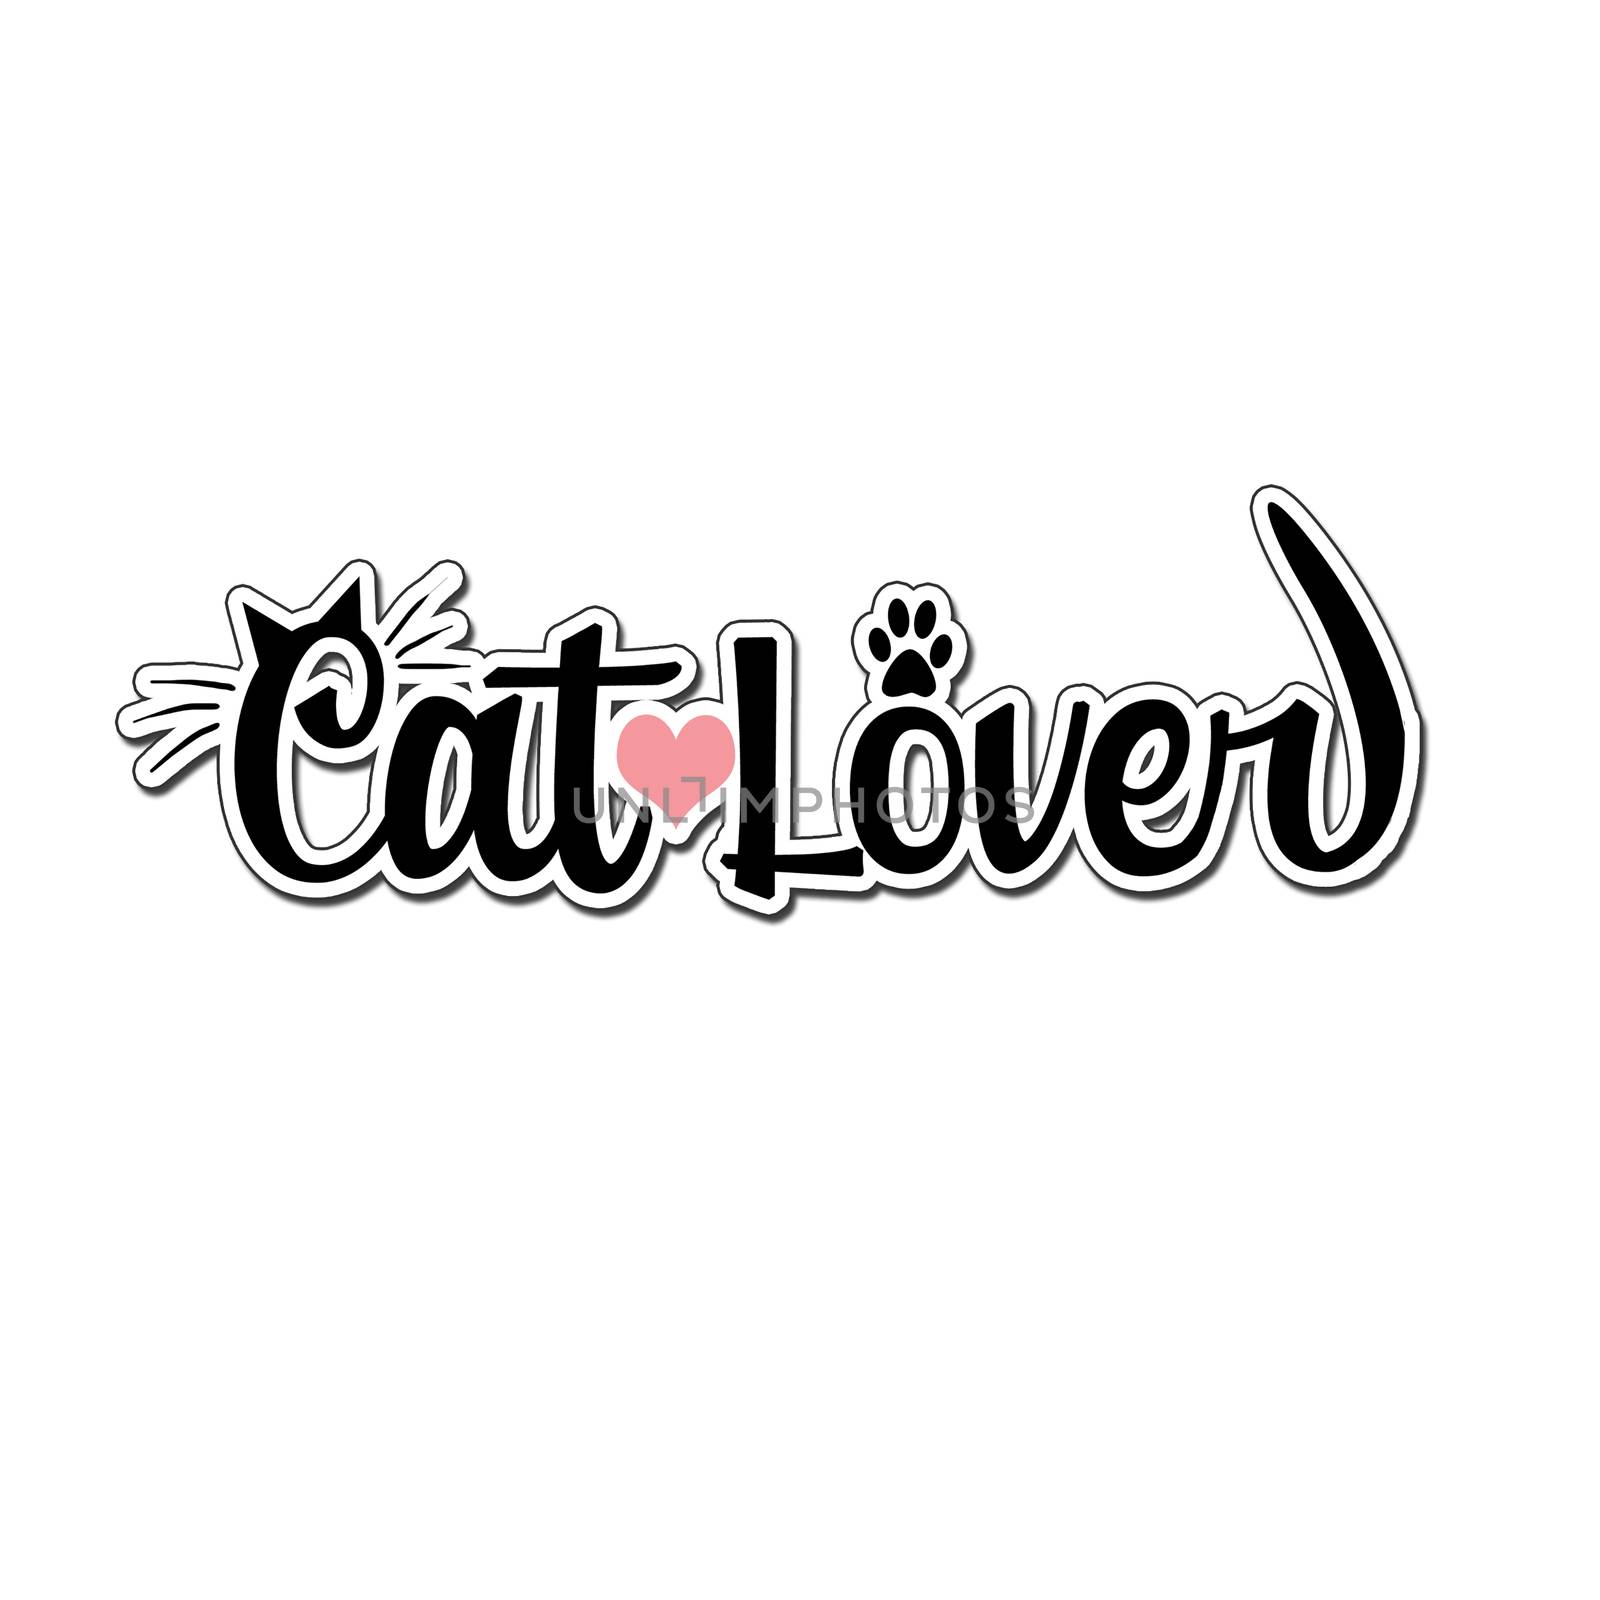 "cat Lover" logo - text background